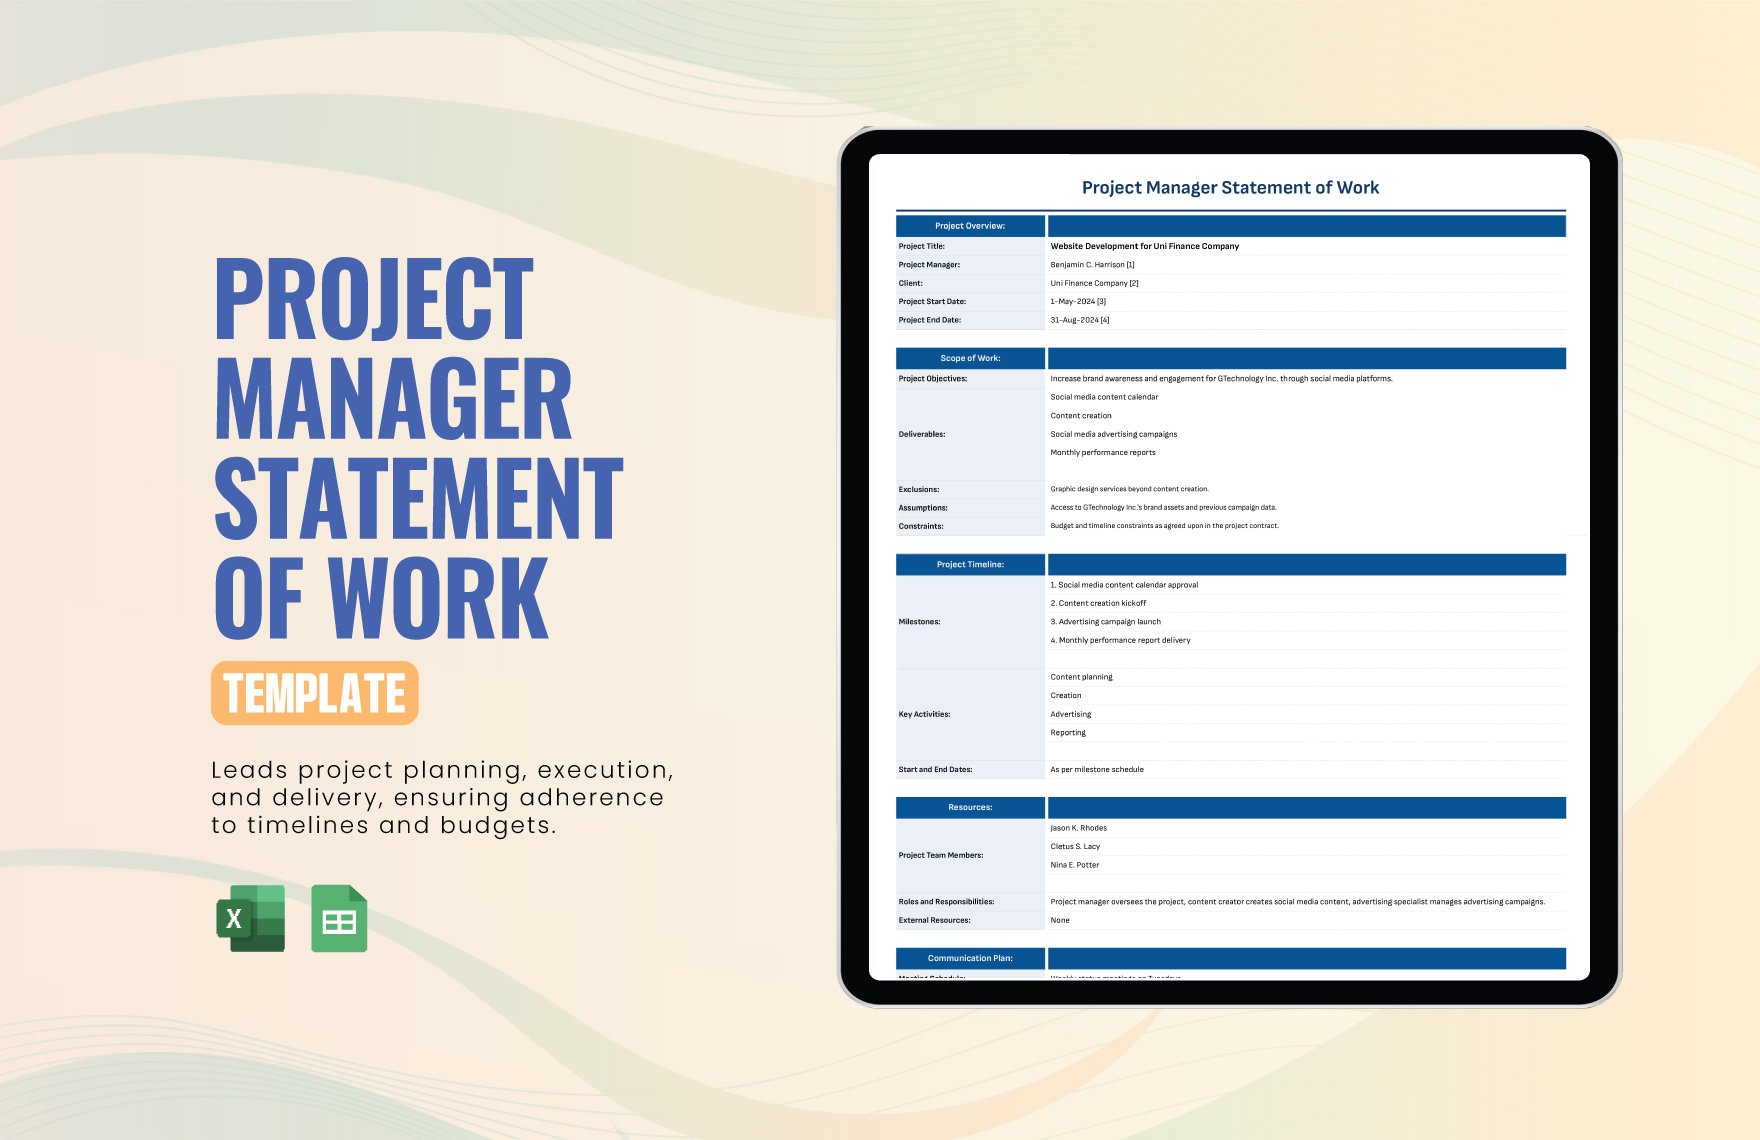 Project Manager Statement of Work Template